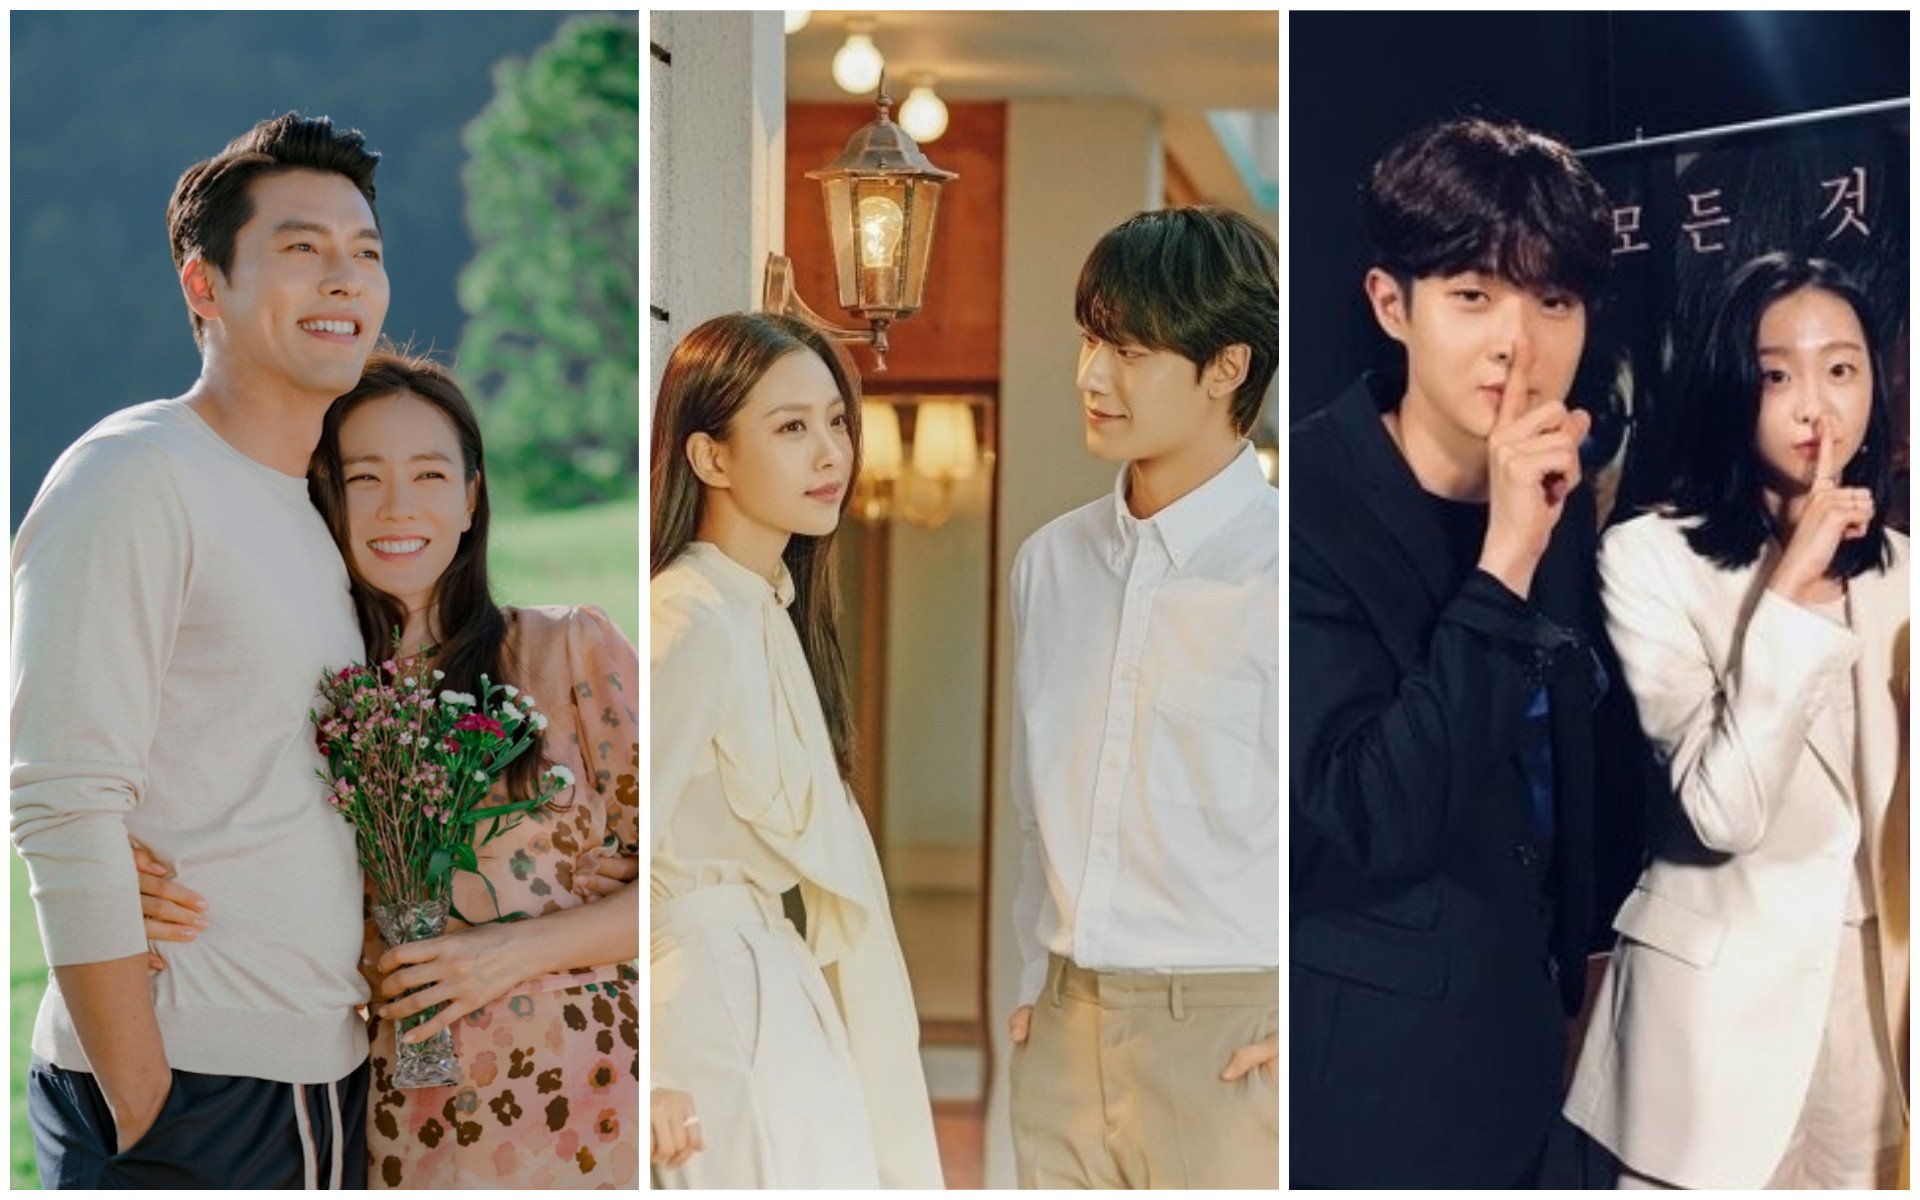 Hyun Bin and Son Ye-jin in Crash Landing on You, Go Min-si and Lee Do-hyun in Youth of May, and Choi Woo-sik and Kim Da-mi in the movie The Witch. Photo: TvN, @MaisQINerds, @newsen_t/ Twitter